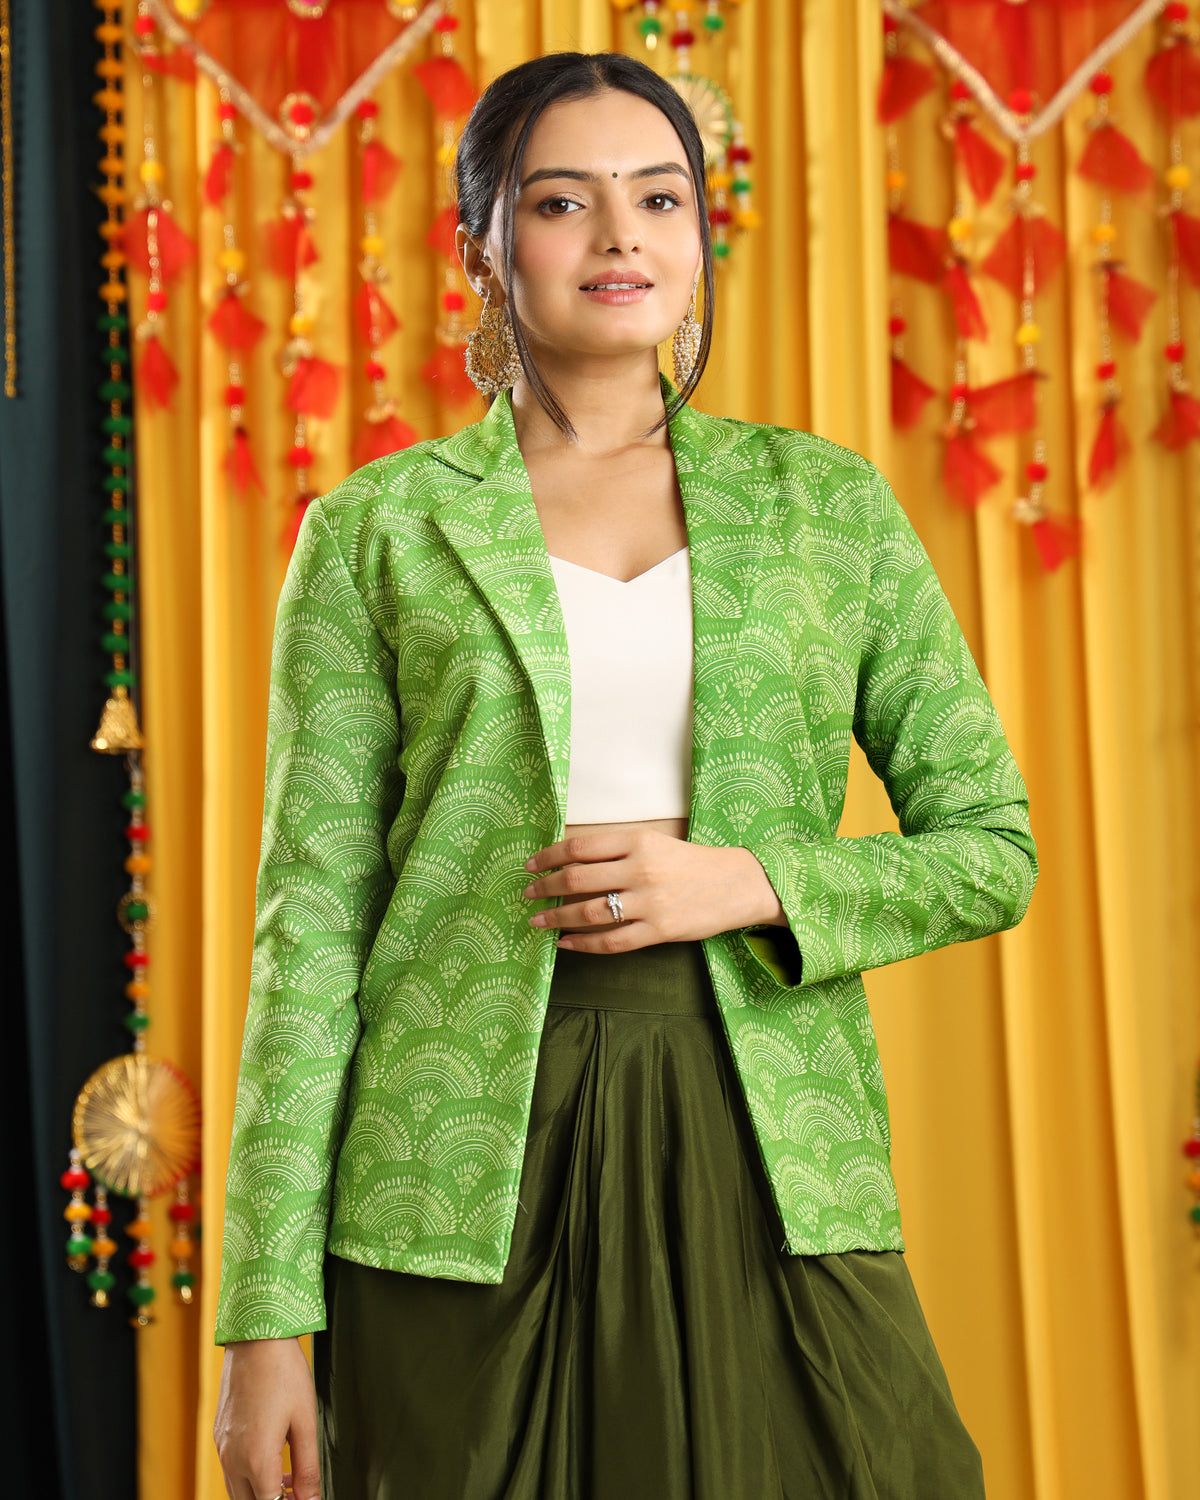 Say "I Do" in Style: The Luxurious Green Womens Jacket